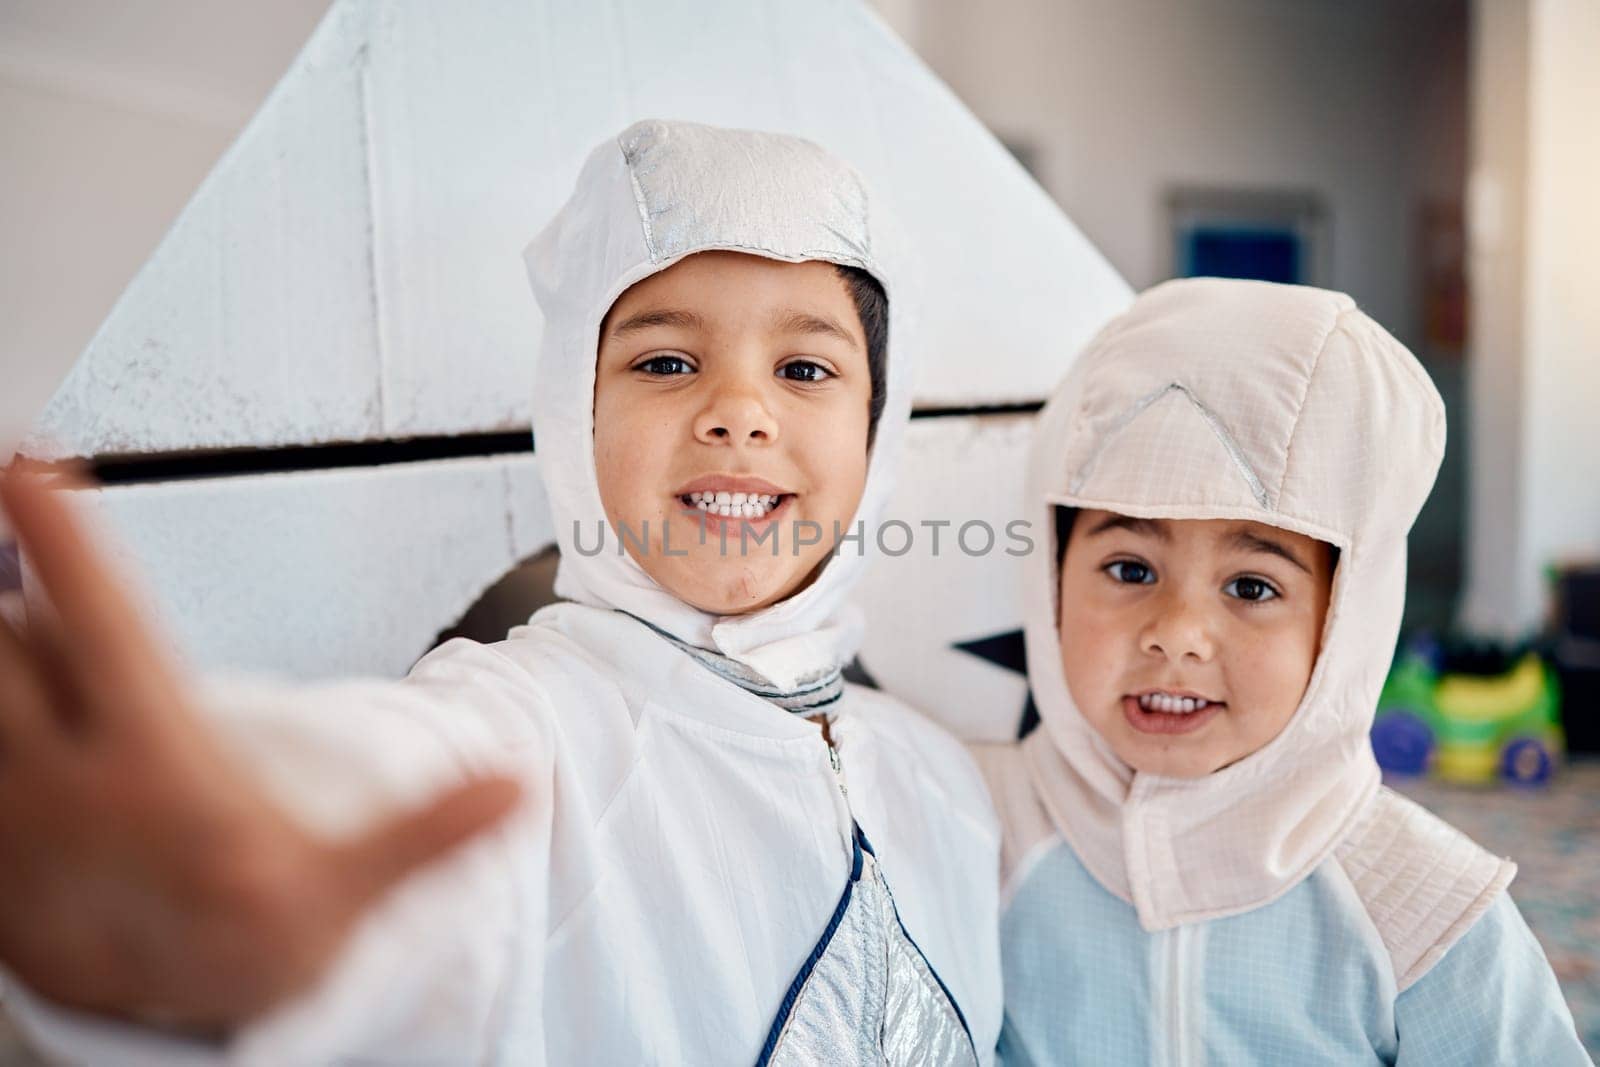 Selfie, costume and playing with children at home for astronaut, halloween and fantasy. Happy, smile and picture with kids in spacesuit in play room for imagination, photography and siblings.